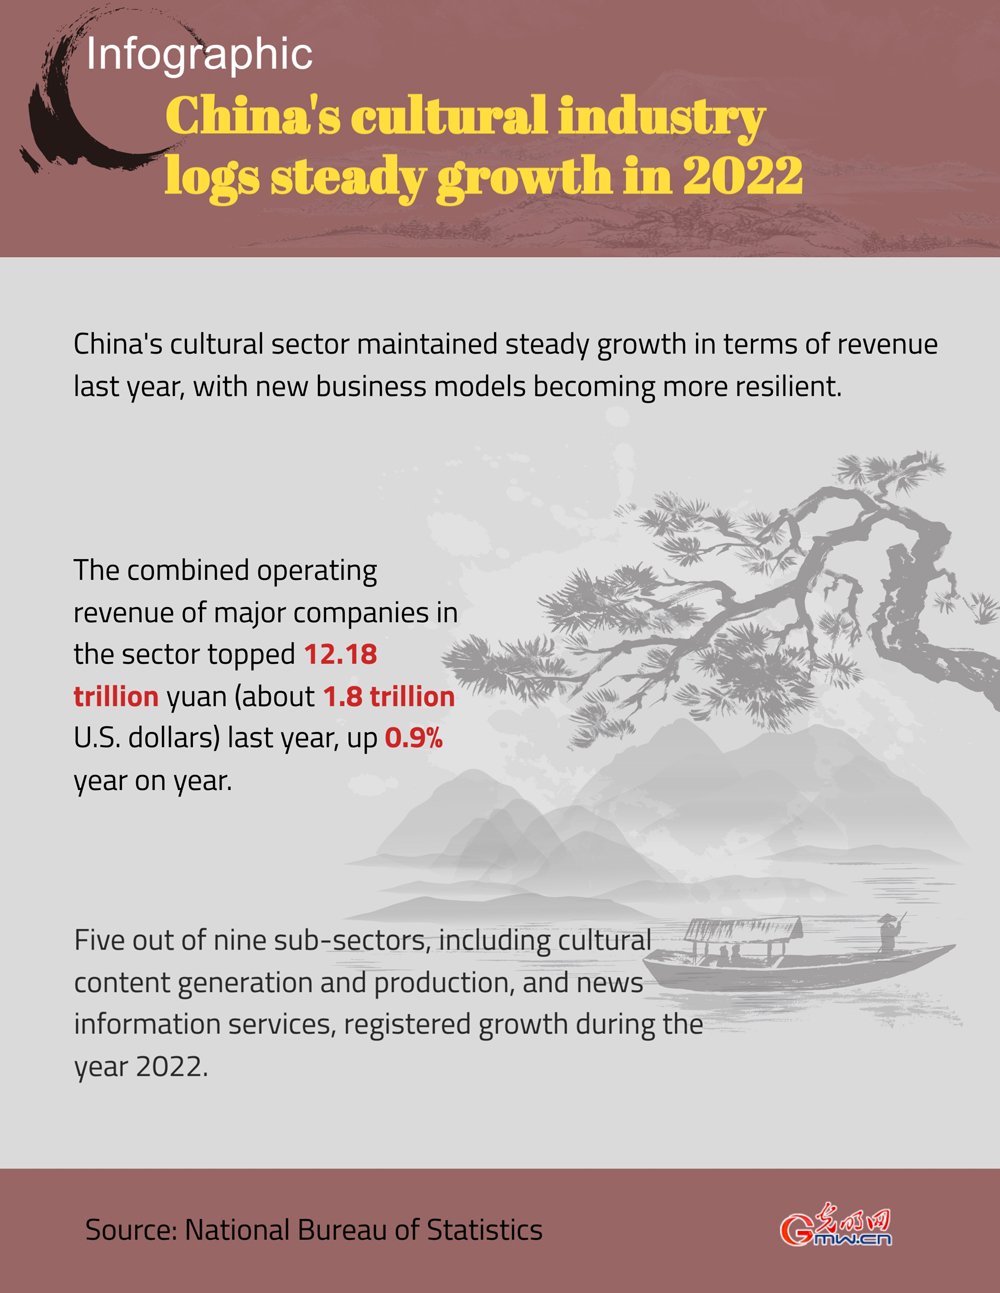 Infographic: China's cultural industry logs steady growth in 2022